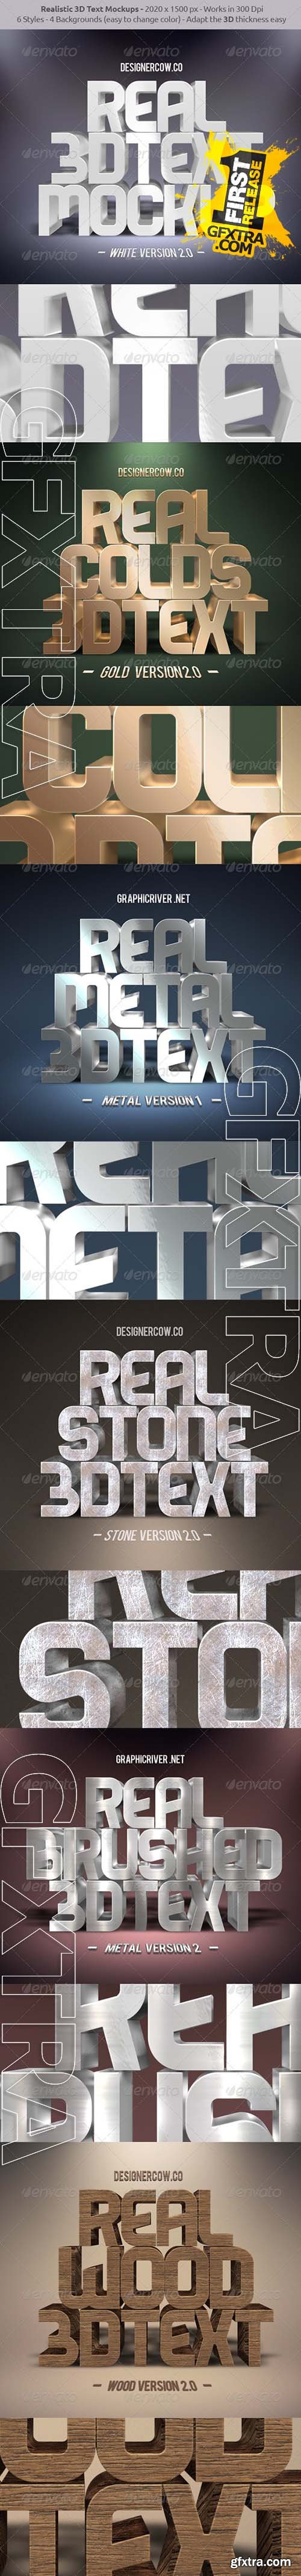 Graphicriver - Real 3D Text Mockups 8553107